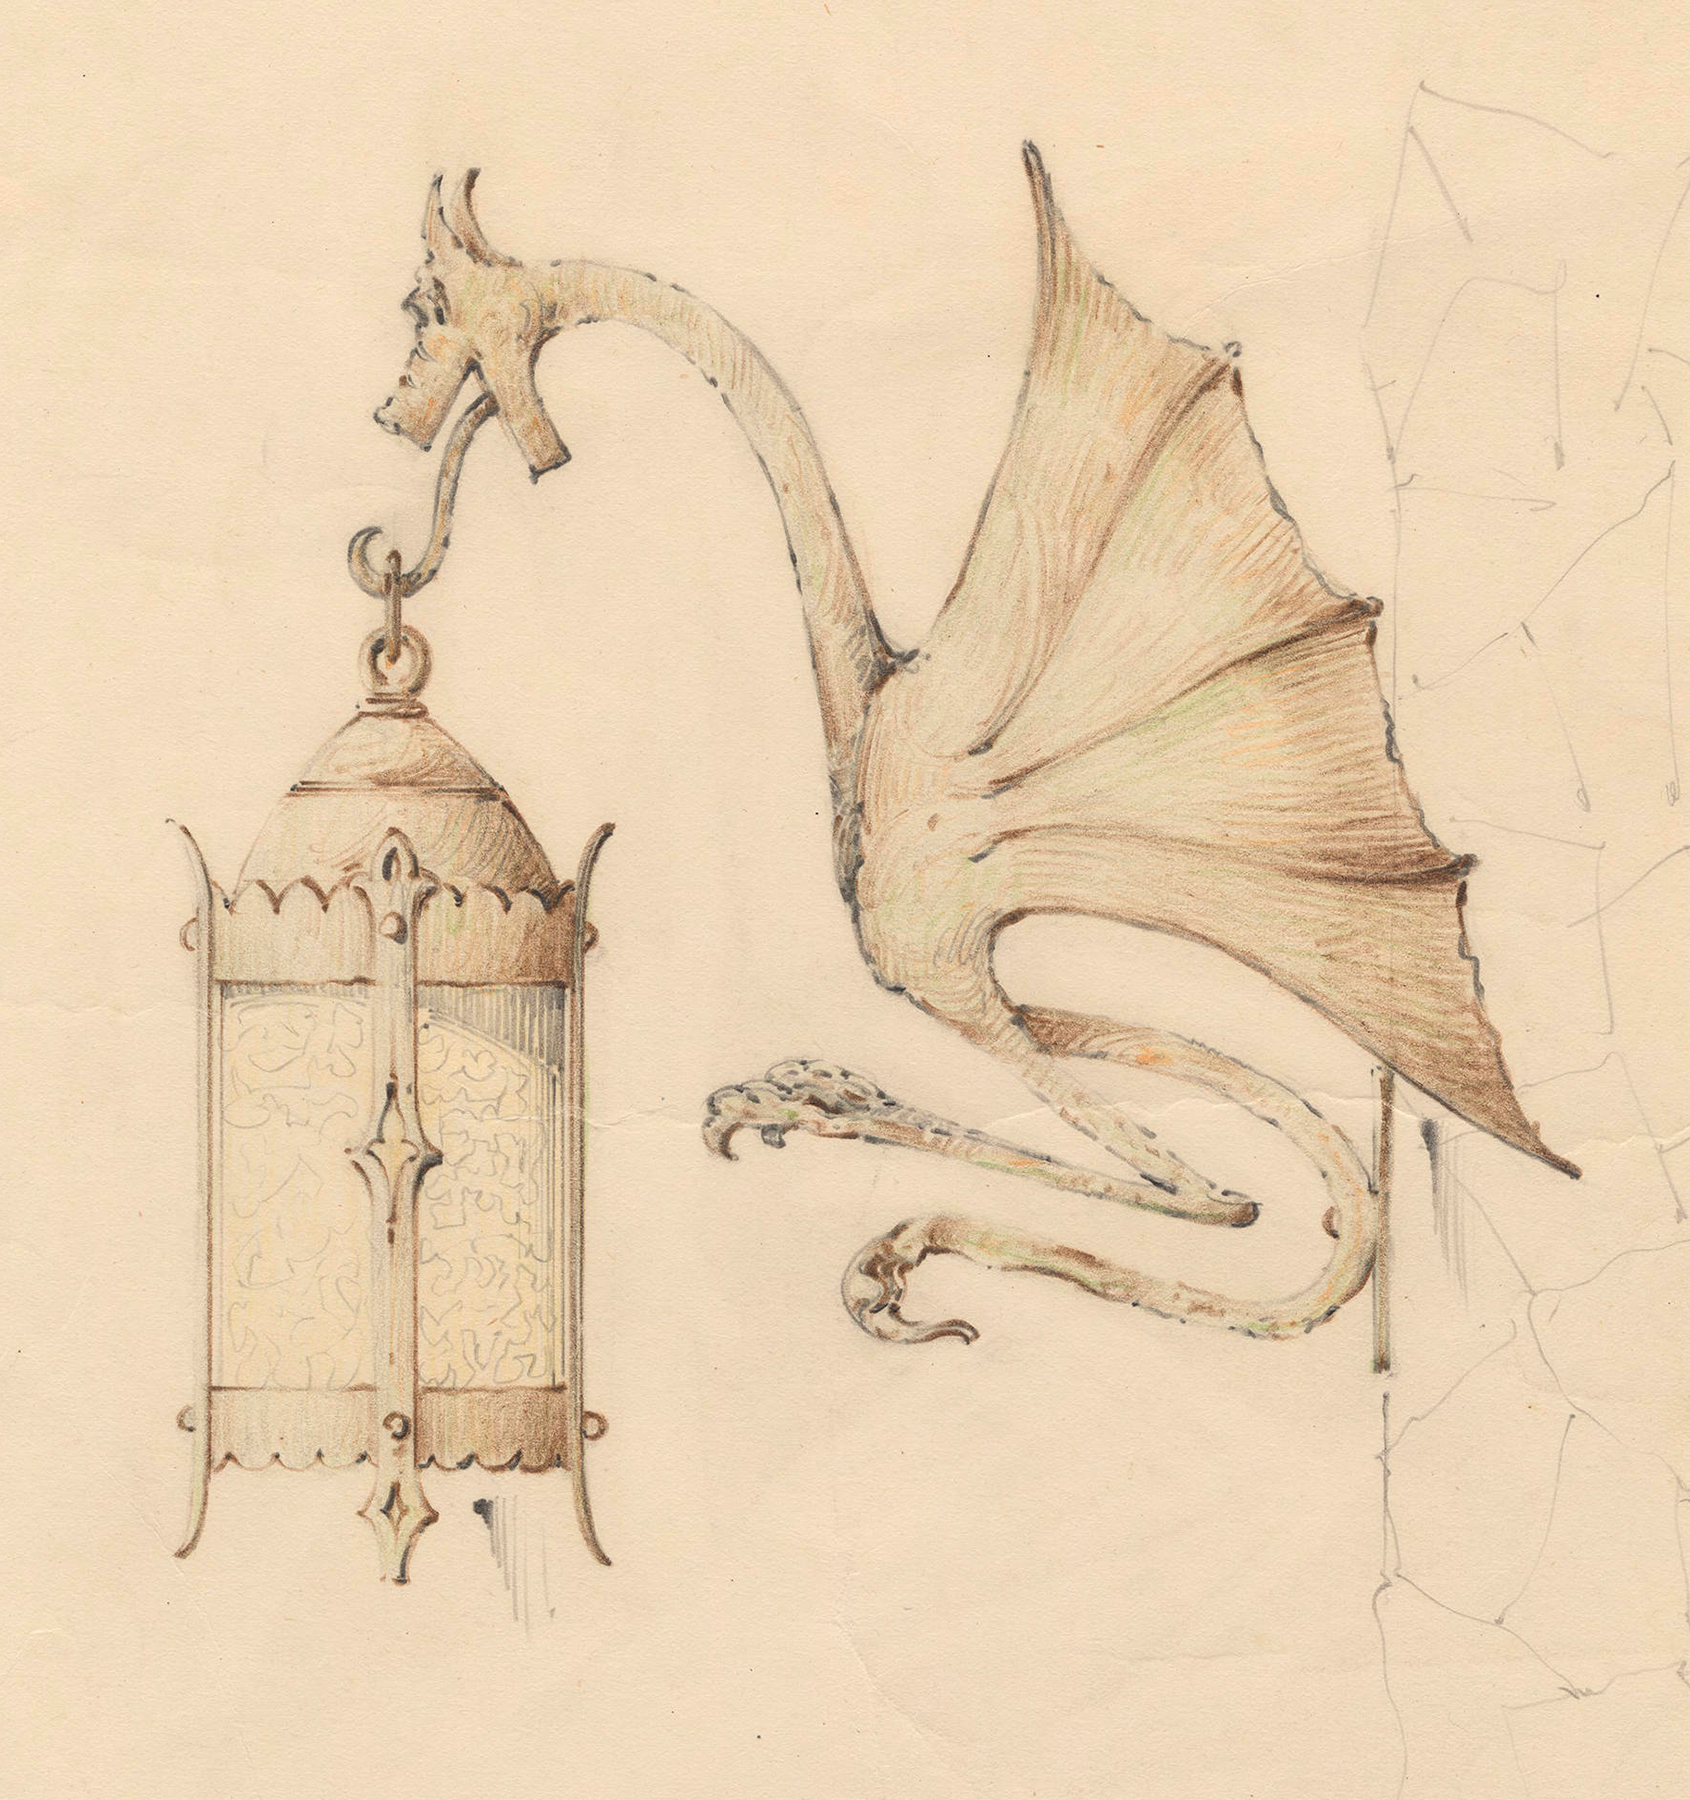 [Lantern Wall Sconce with Dragon Design], 1934, shop drawing